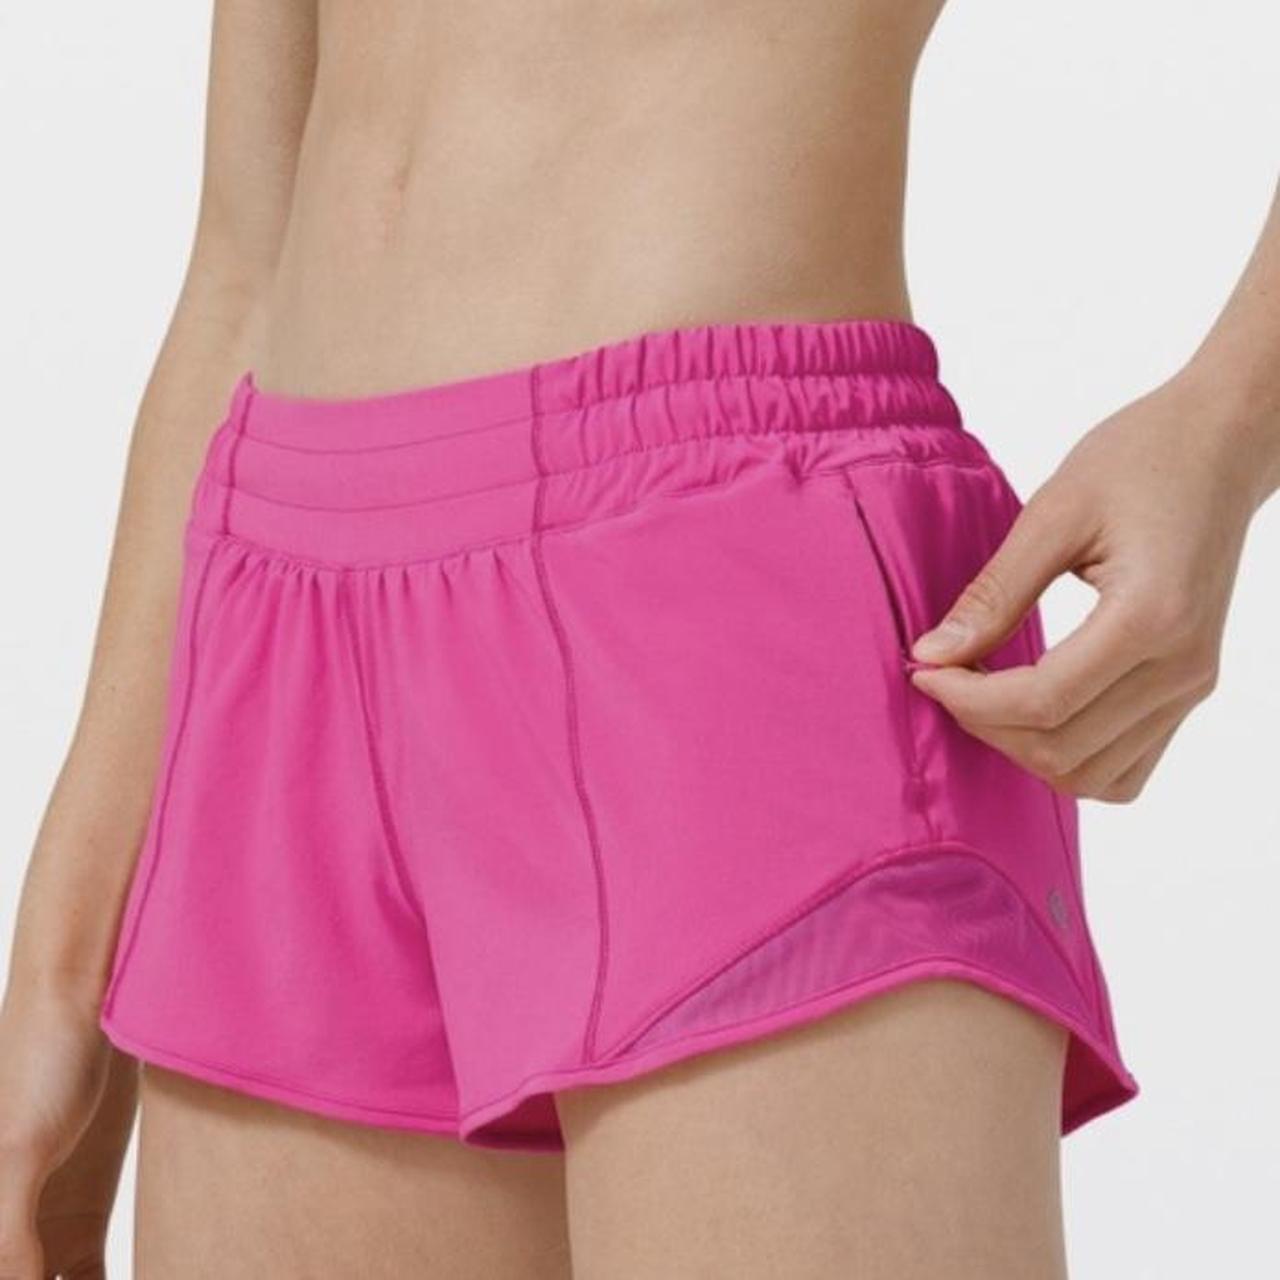 LULULEMON Hotty hot shorts in sonic pink, 2.5 inch